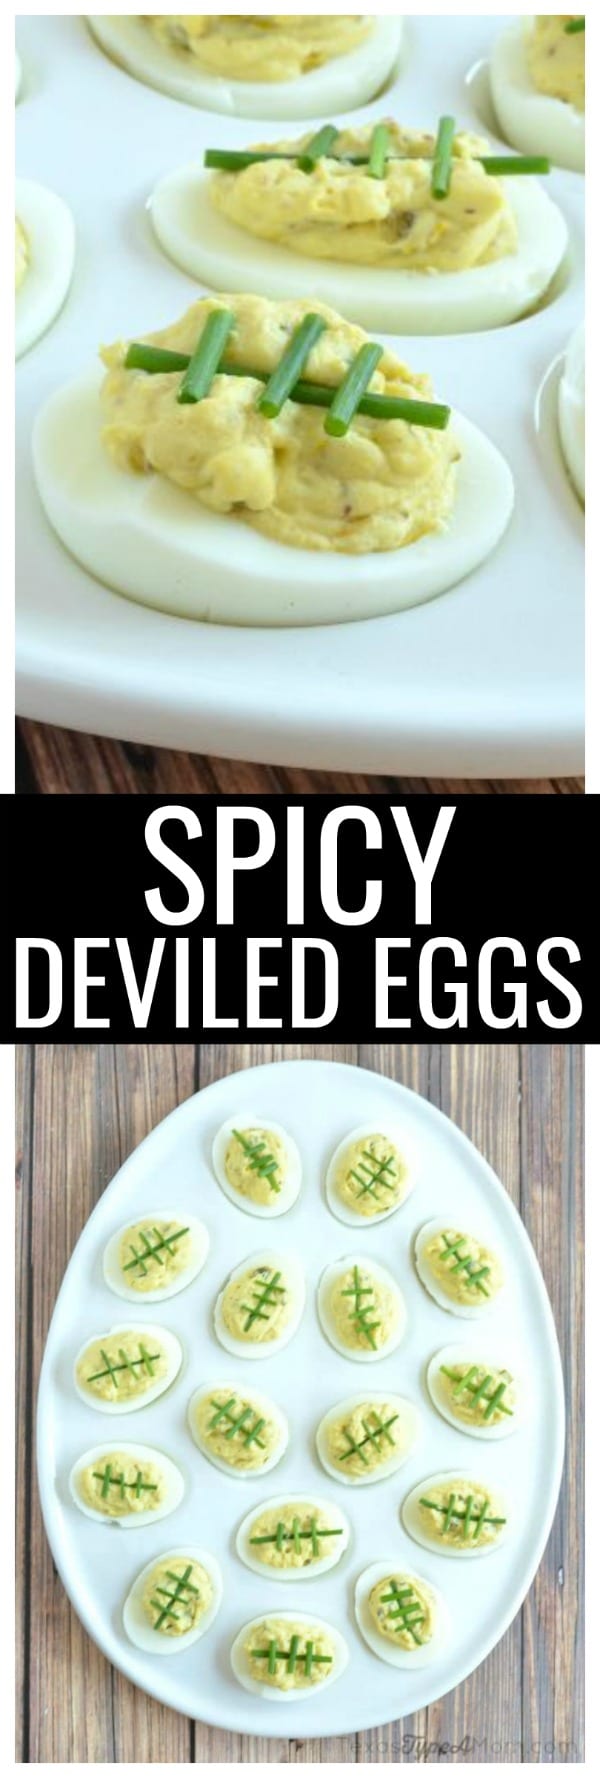 These Spicy Deviled Egg Footballs are the perfect appetizer recipe for your Game Day party! They can be customized to be as spicy (or mild) as you want!